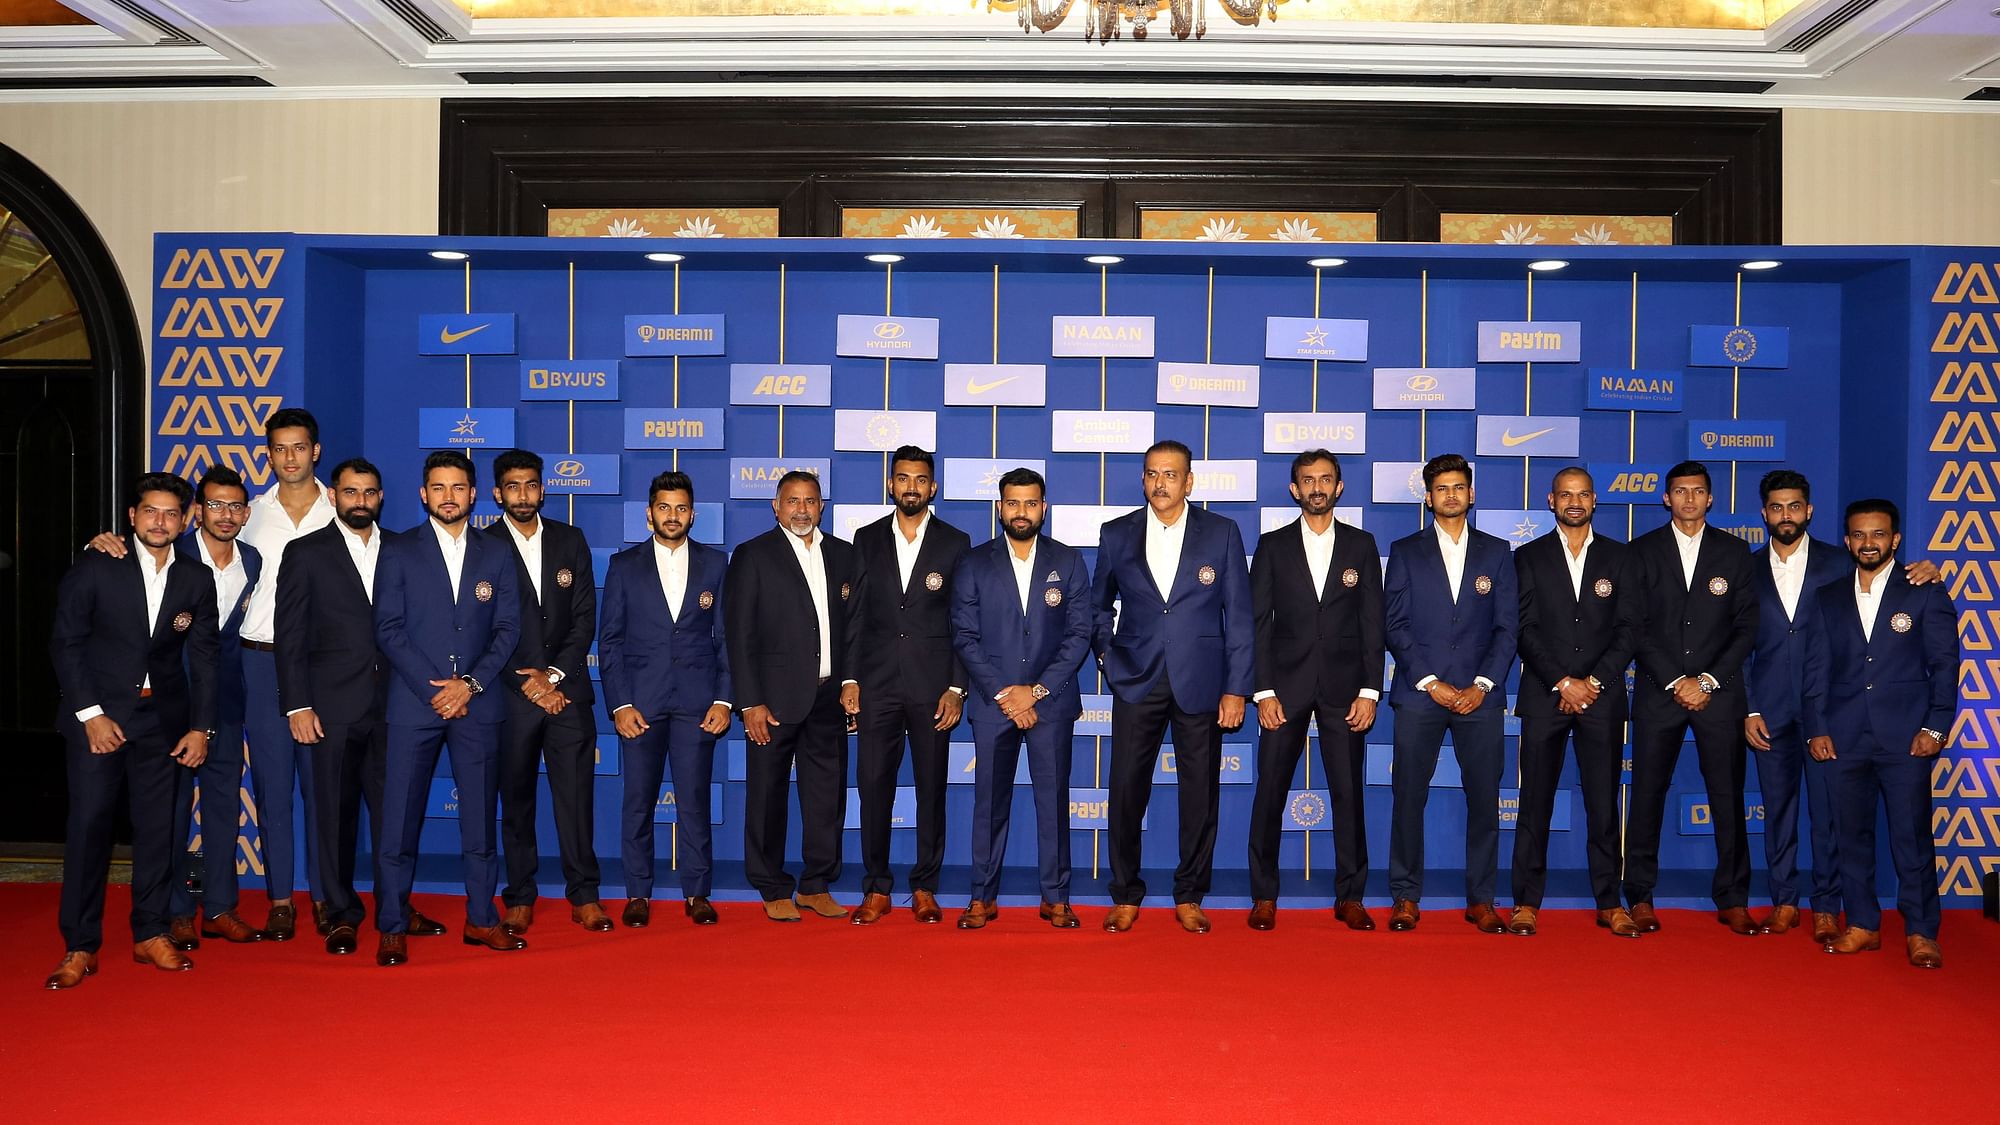 The entire Indian team was present at the BCCI Annual Awards in Mumbai on Sunday night.